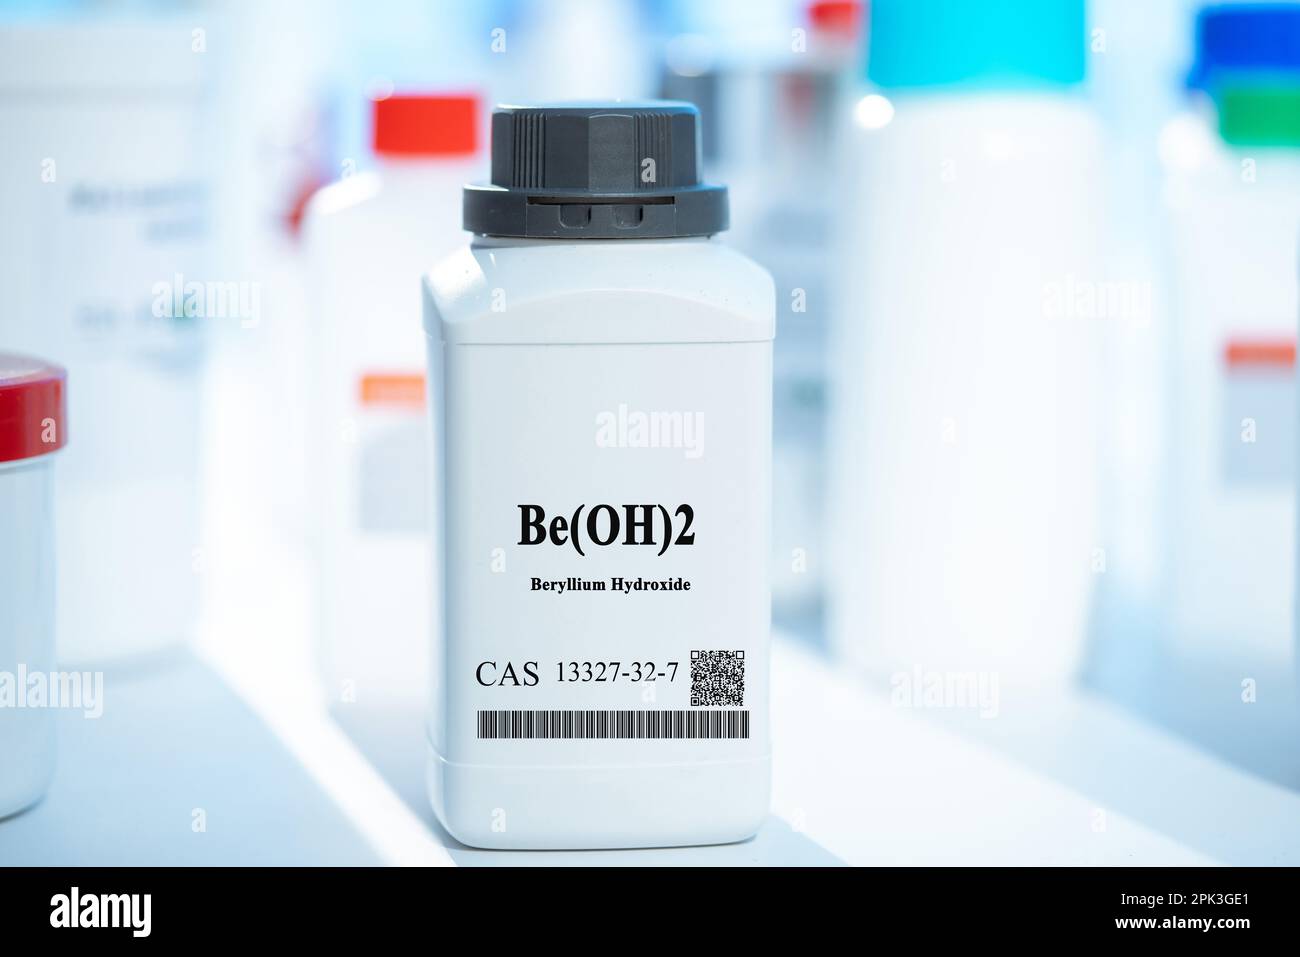 Be(OH)2 beryllium hydroxide CAS 13327-32-7 chemical substance in white plastic laboratory packaging Stock Photo